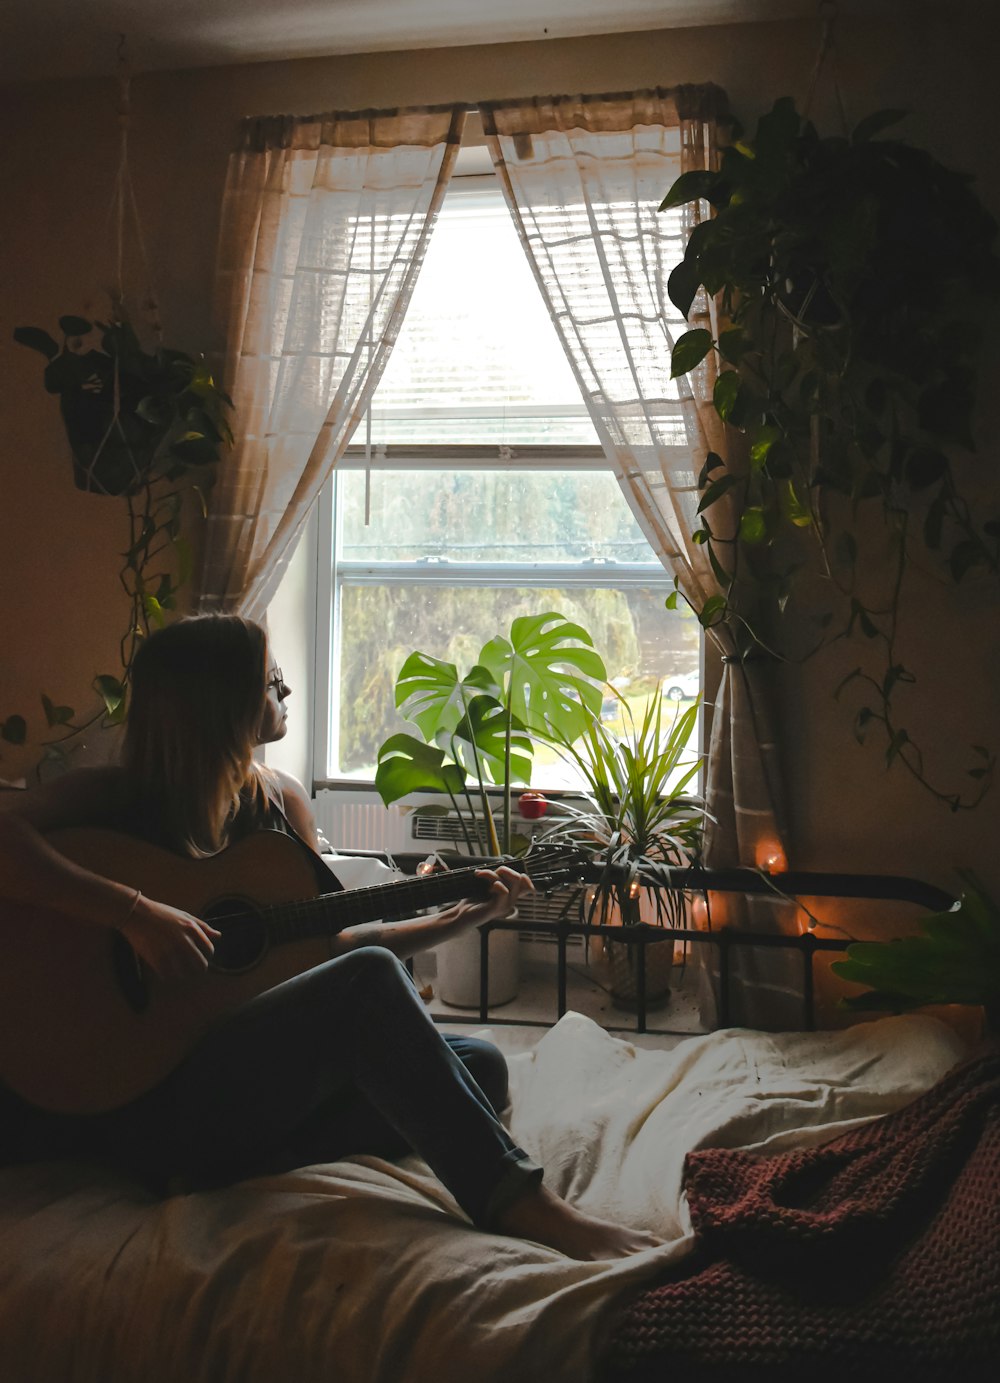 a woman sitting on a bed playing a guitar